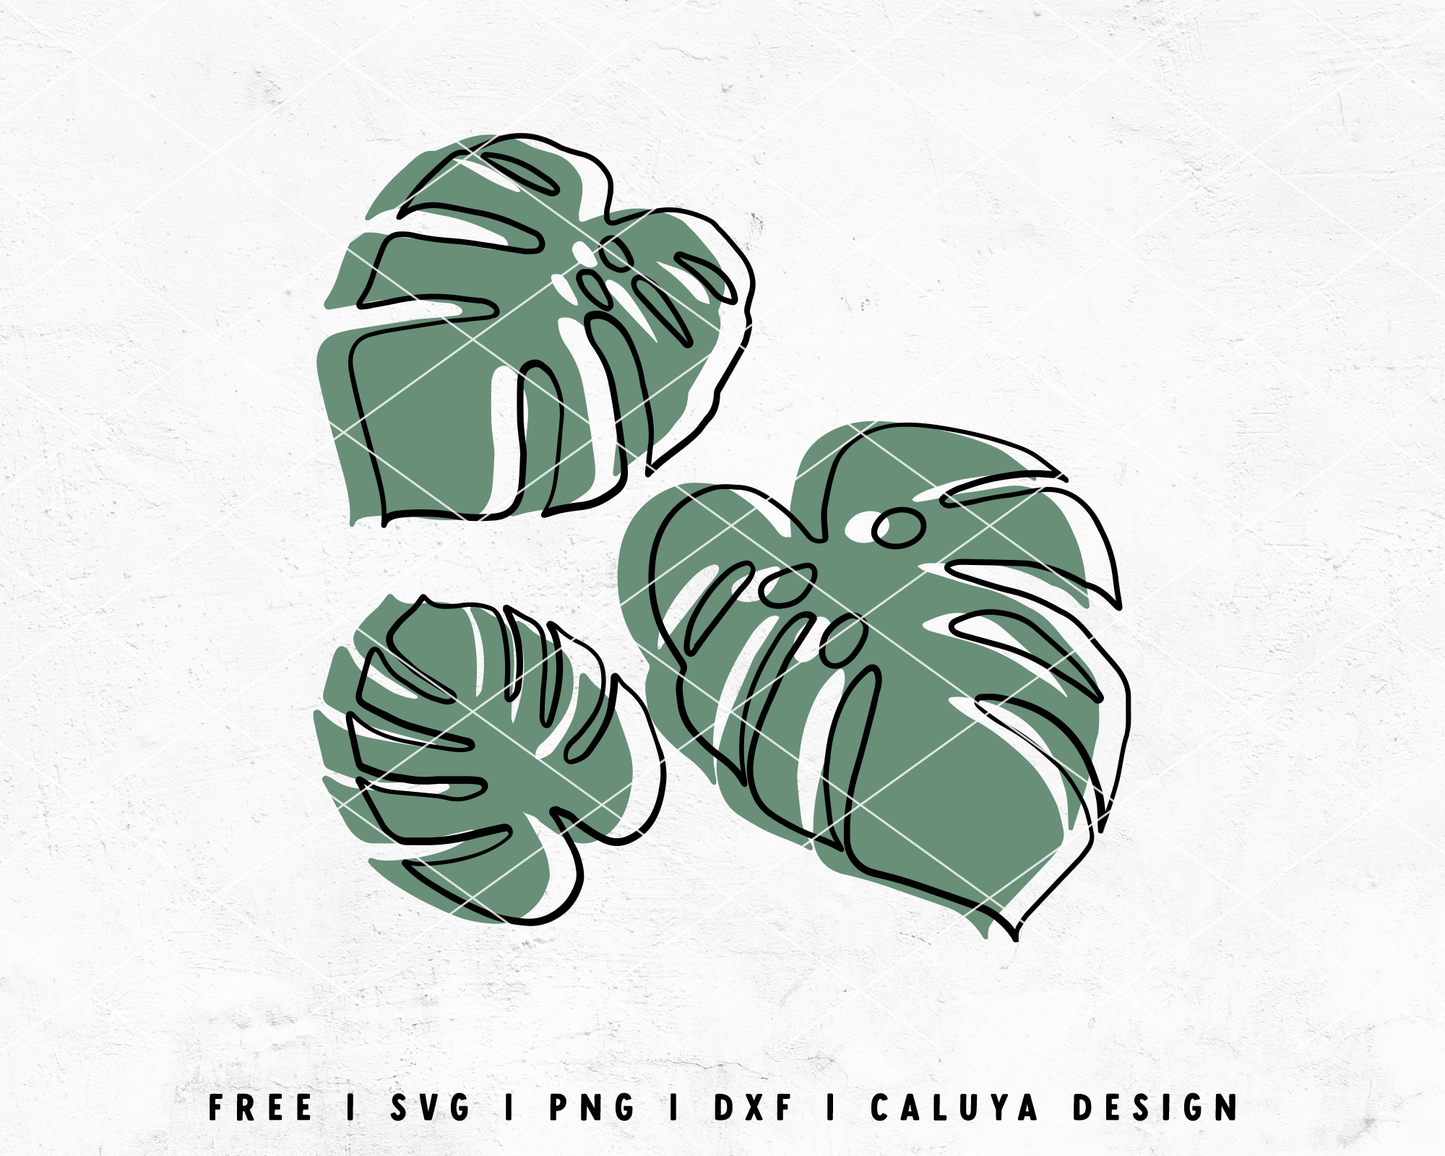 FREE Monstera SVG | House Plant SVG Cut File for Cricut, Cameo Silhouette | Free SVG Cut File